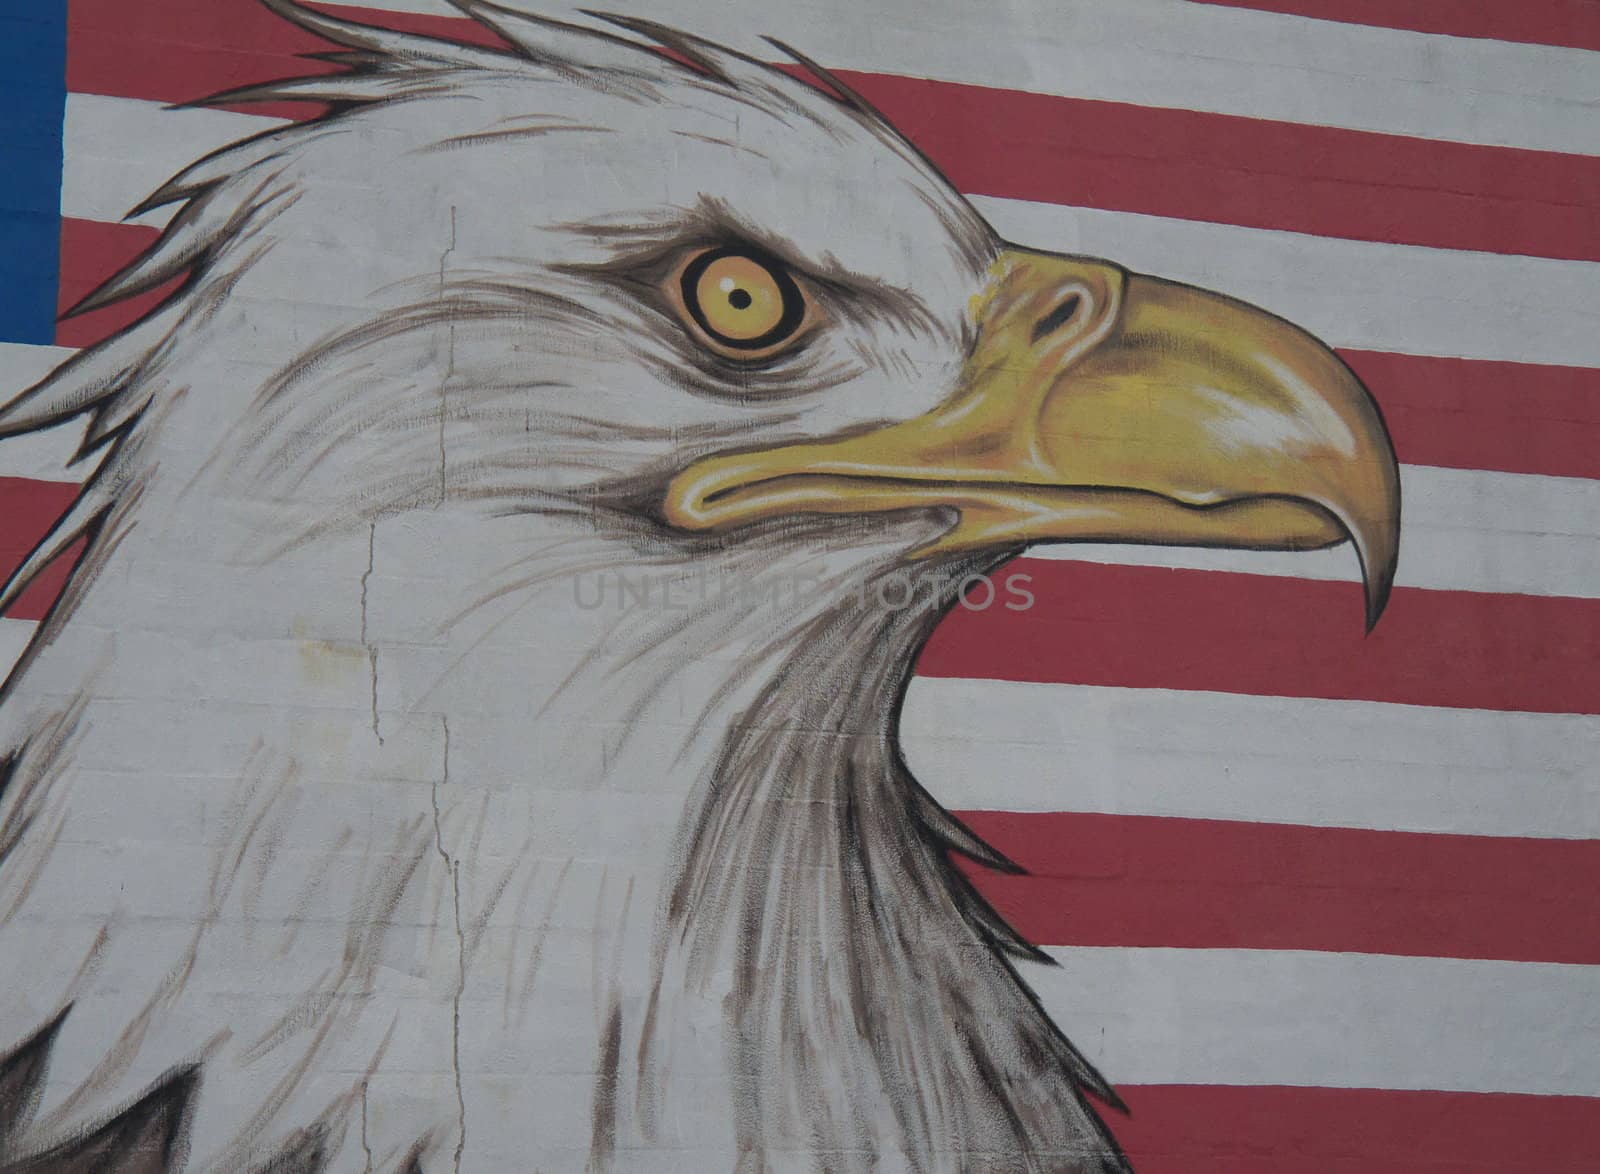 graffiti of an eagle with the american flag in the background